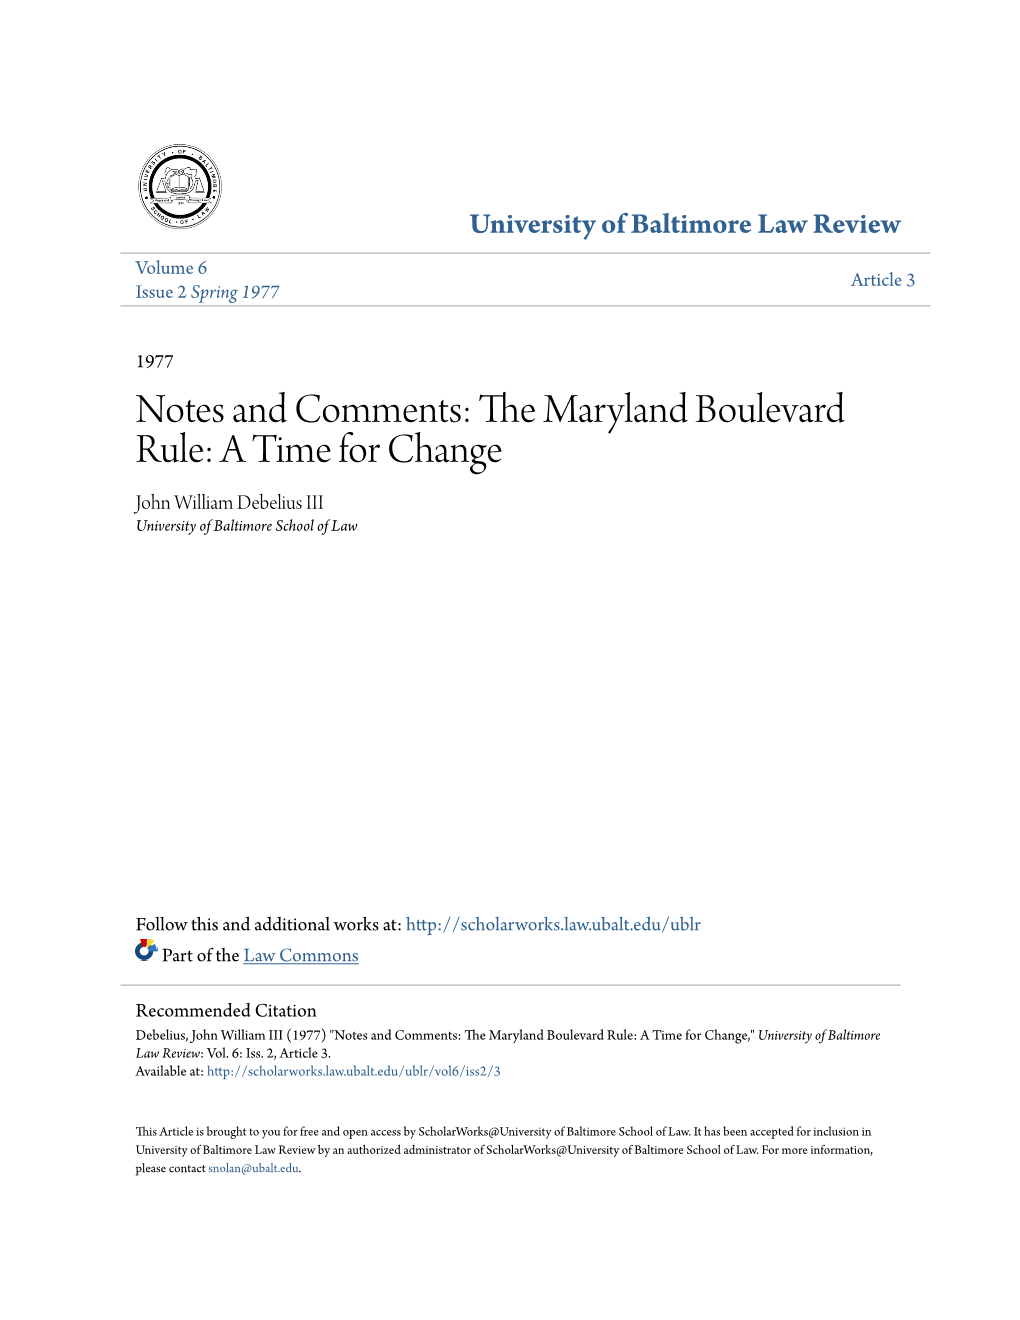 THE MARYLAND BOULEVARD RULE: a TIME for CHANGE Maryland's Boulevard Rule Has Survived Frequent Challenge and the Apparent Harshness of Its Results in Recent Cases